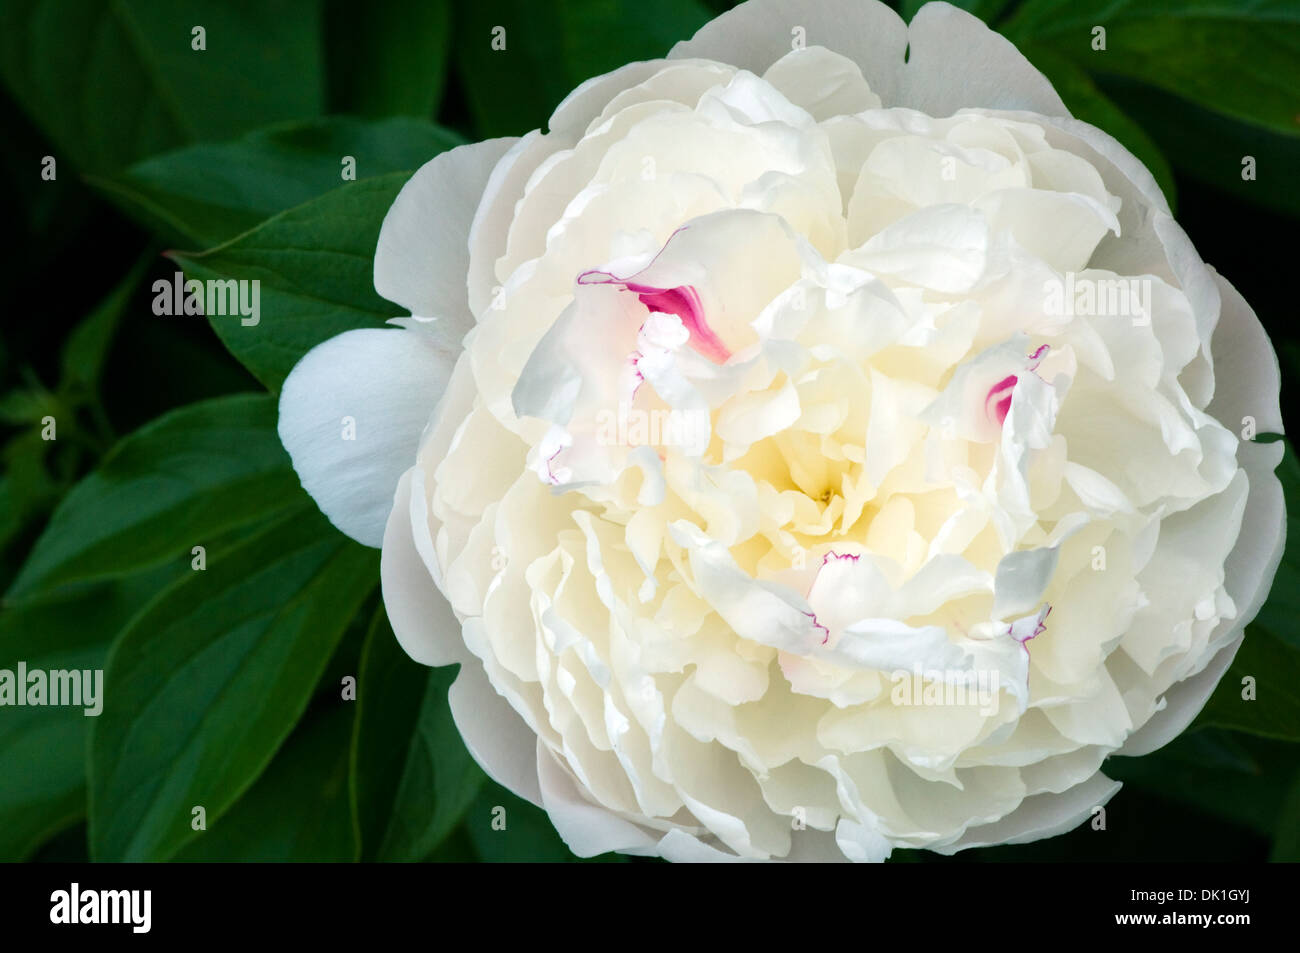 White peony flower with red stripes, macro close up. Stock Photo